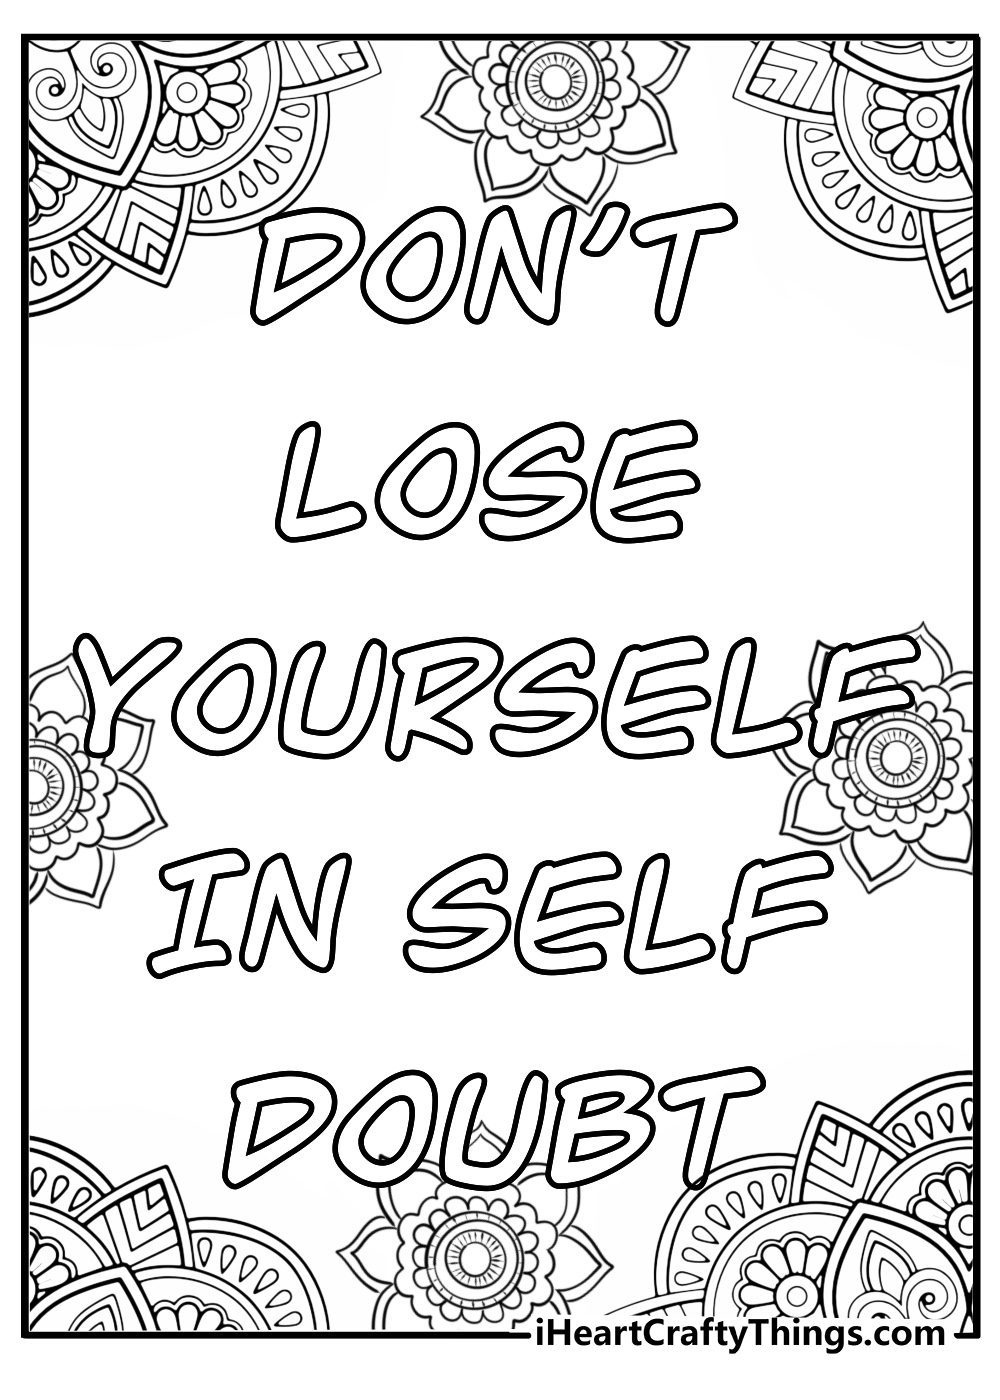 Depression coloring pages for adults.